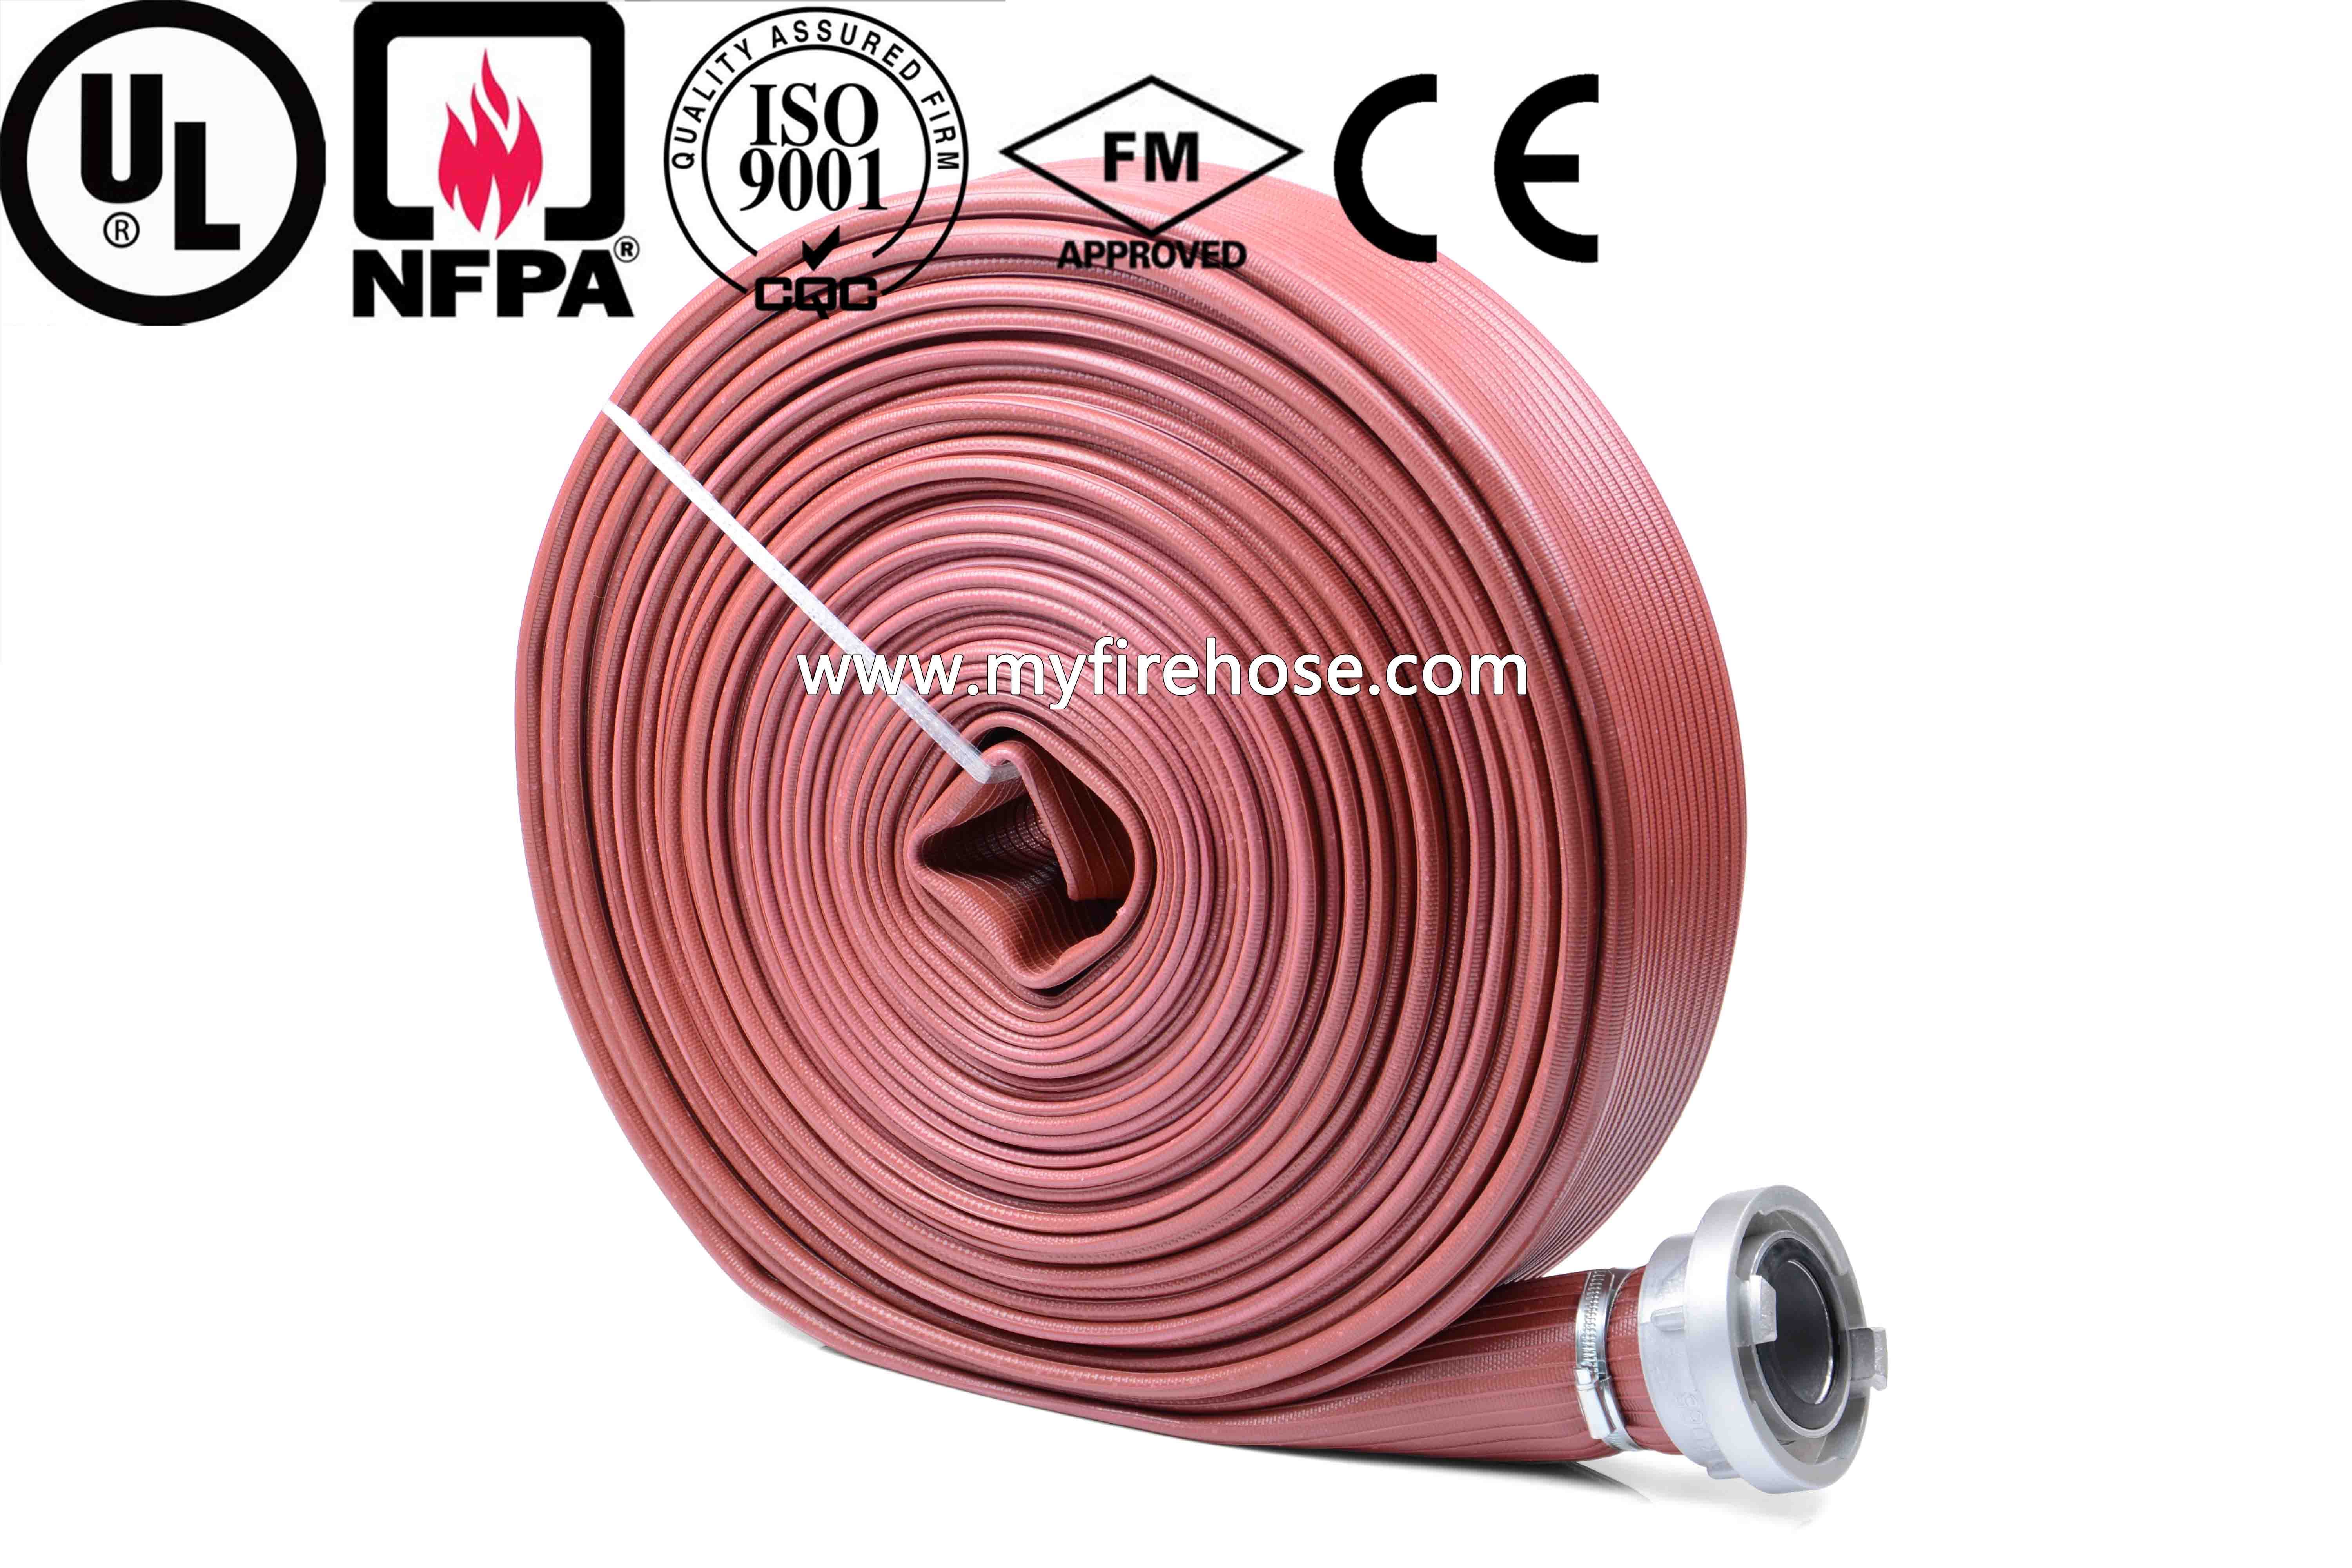 2 Inch Resistance The Canvas Delivery Fire Hose - China Fire Hose